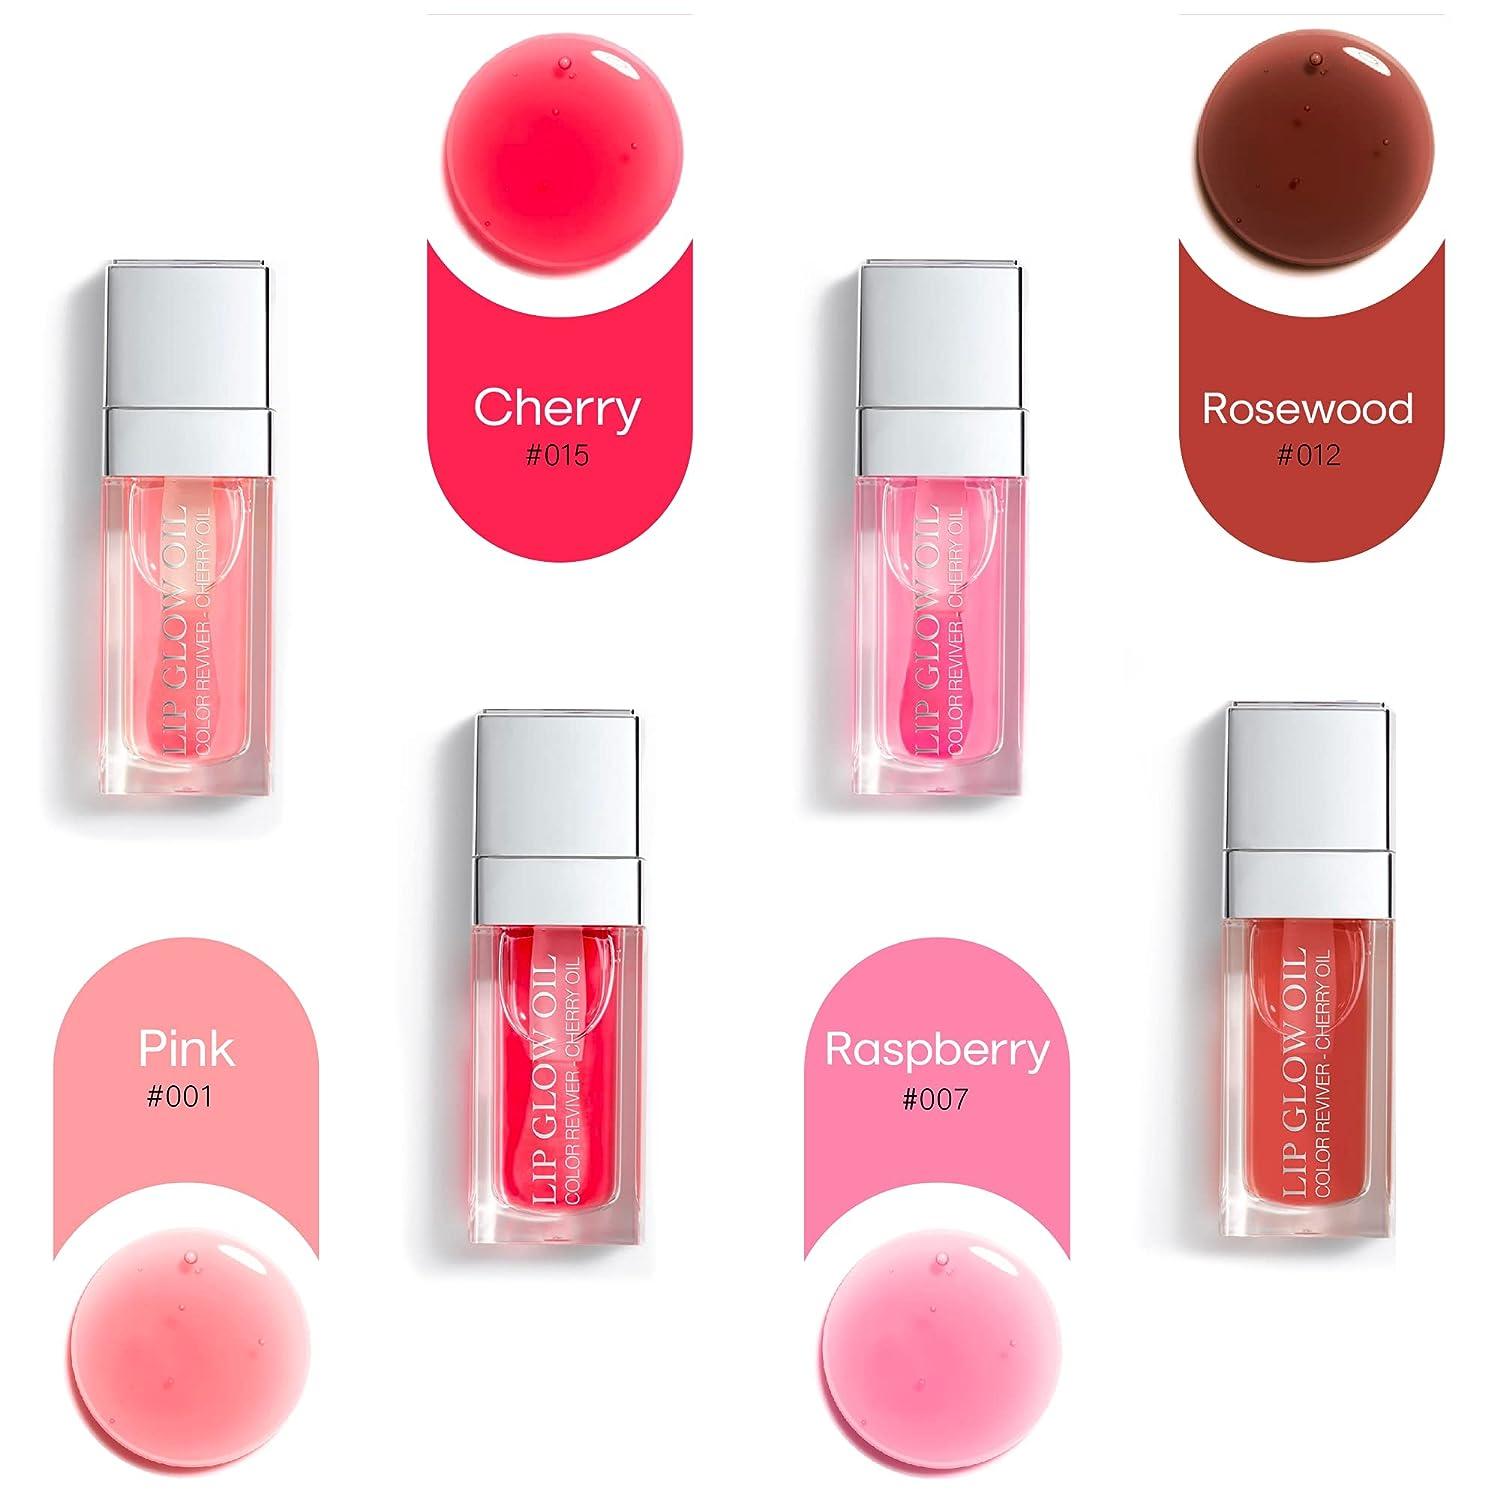 Does The Pink Stuff Really Work? A Review - PureWow